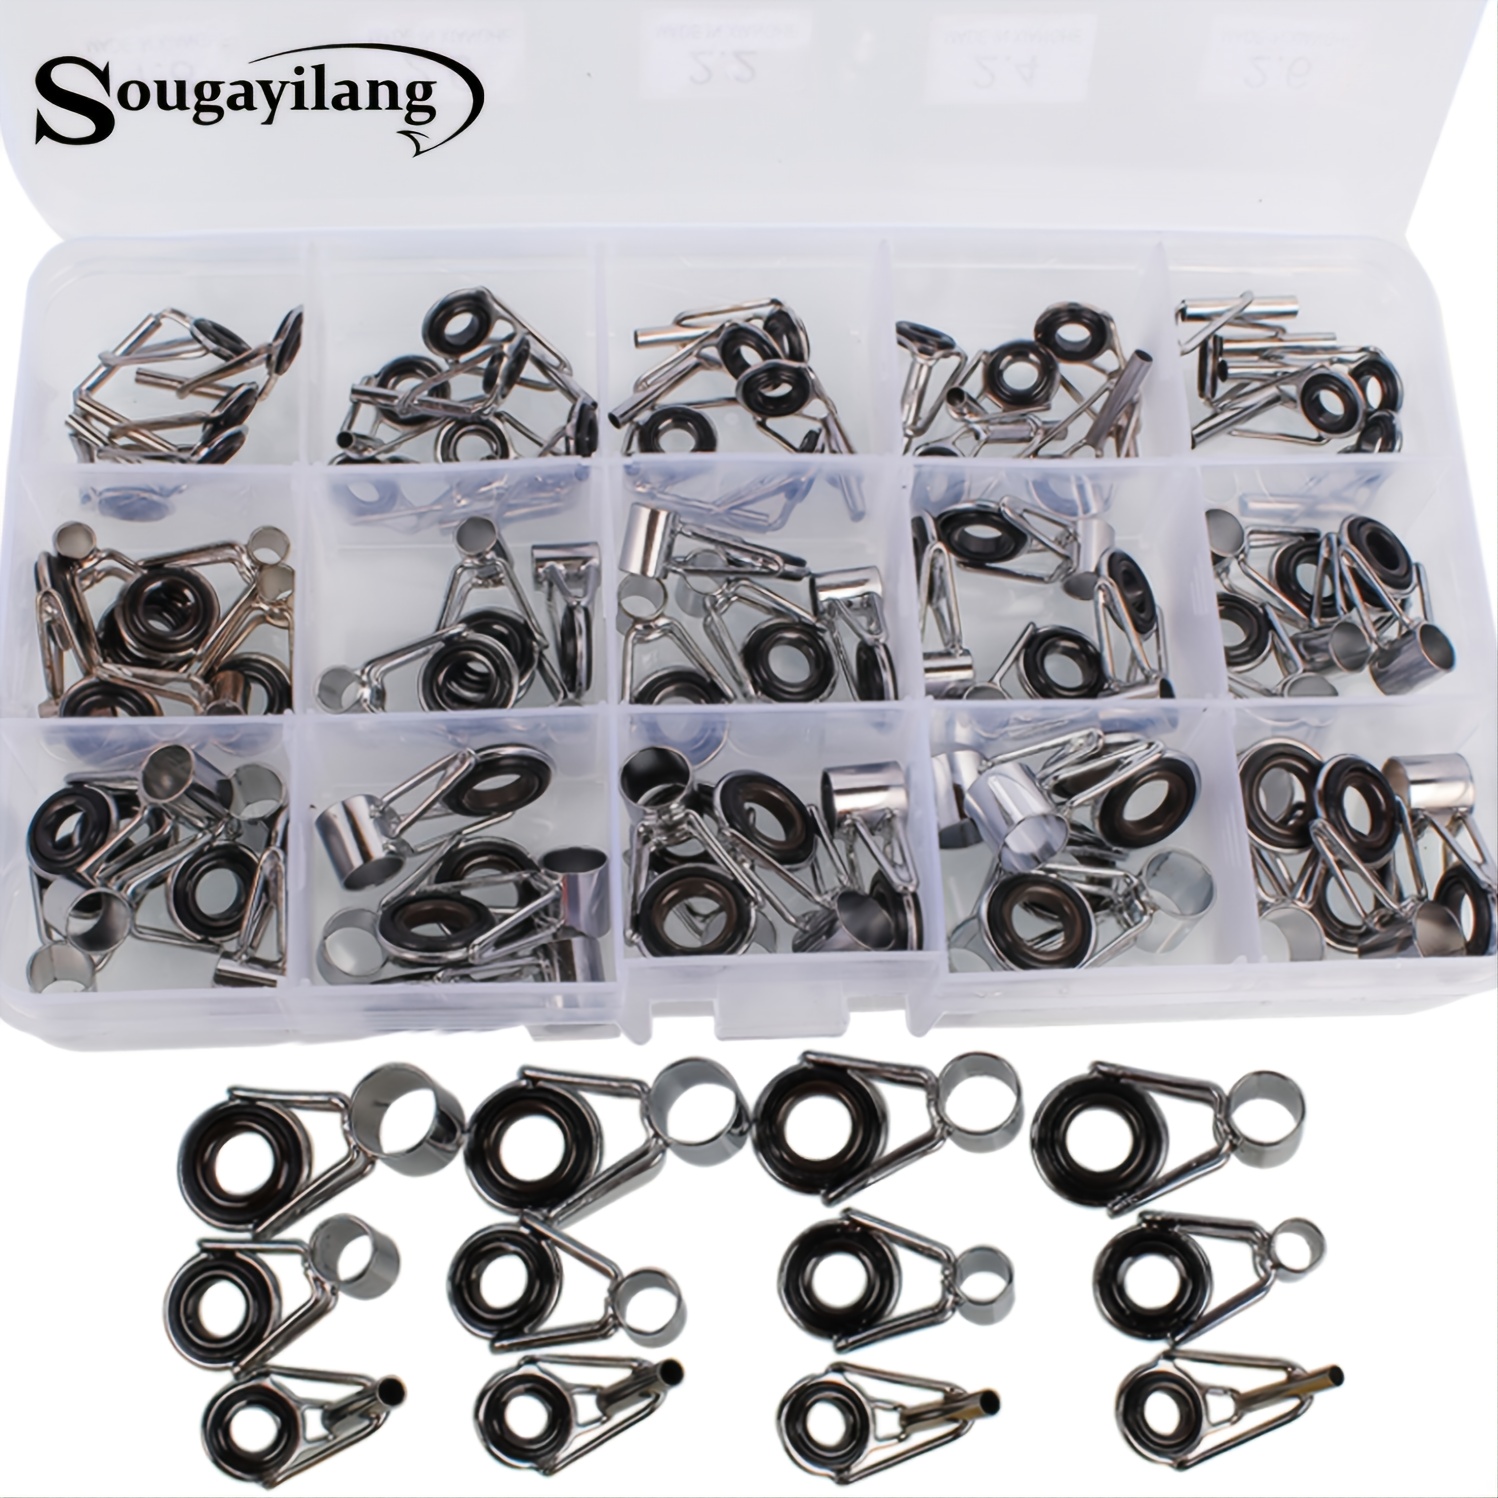 75pcs Fishing Rod Guides Repair Kit - Keep Your Rods in Top Condition with  Sougayilang!